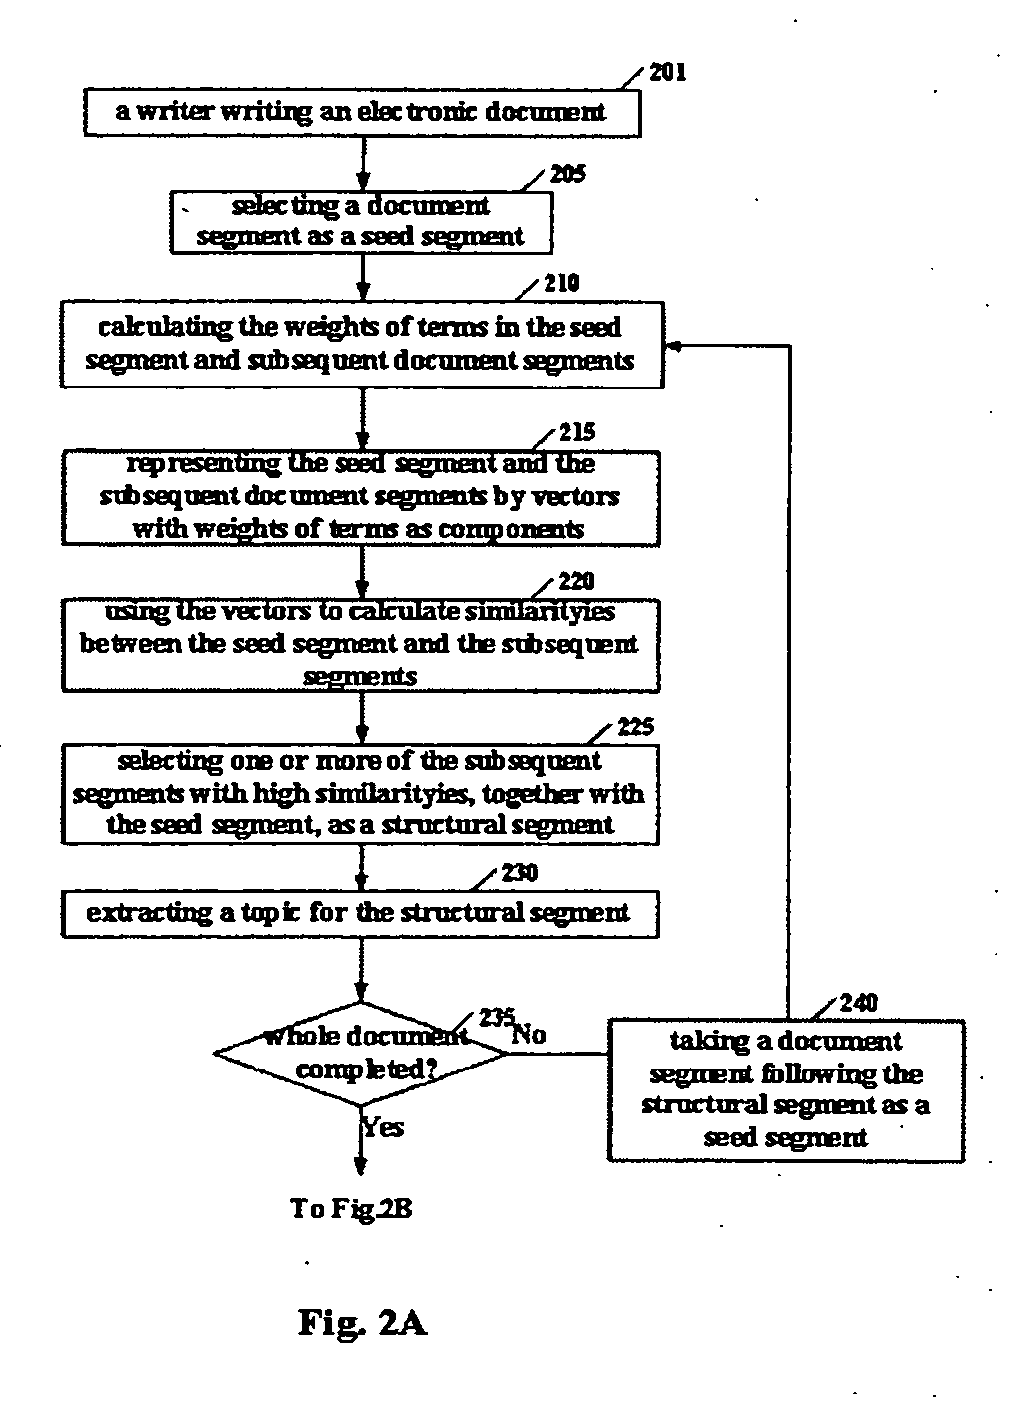 Computer aided authoring and browsing of an electronic document